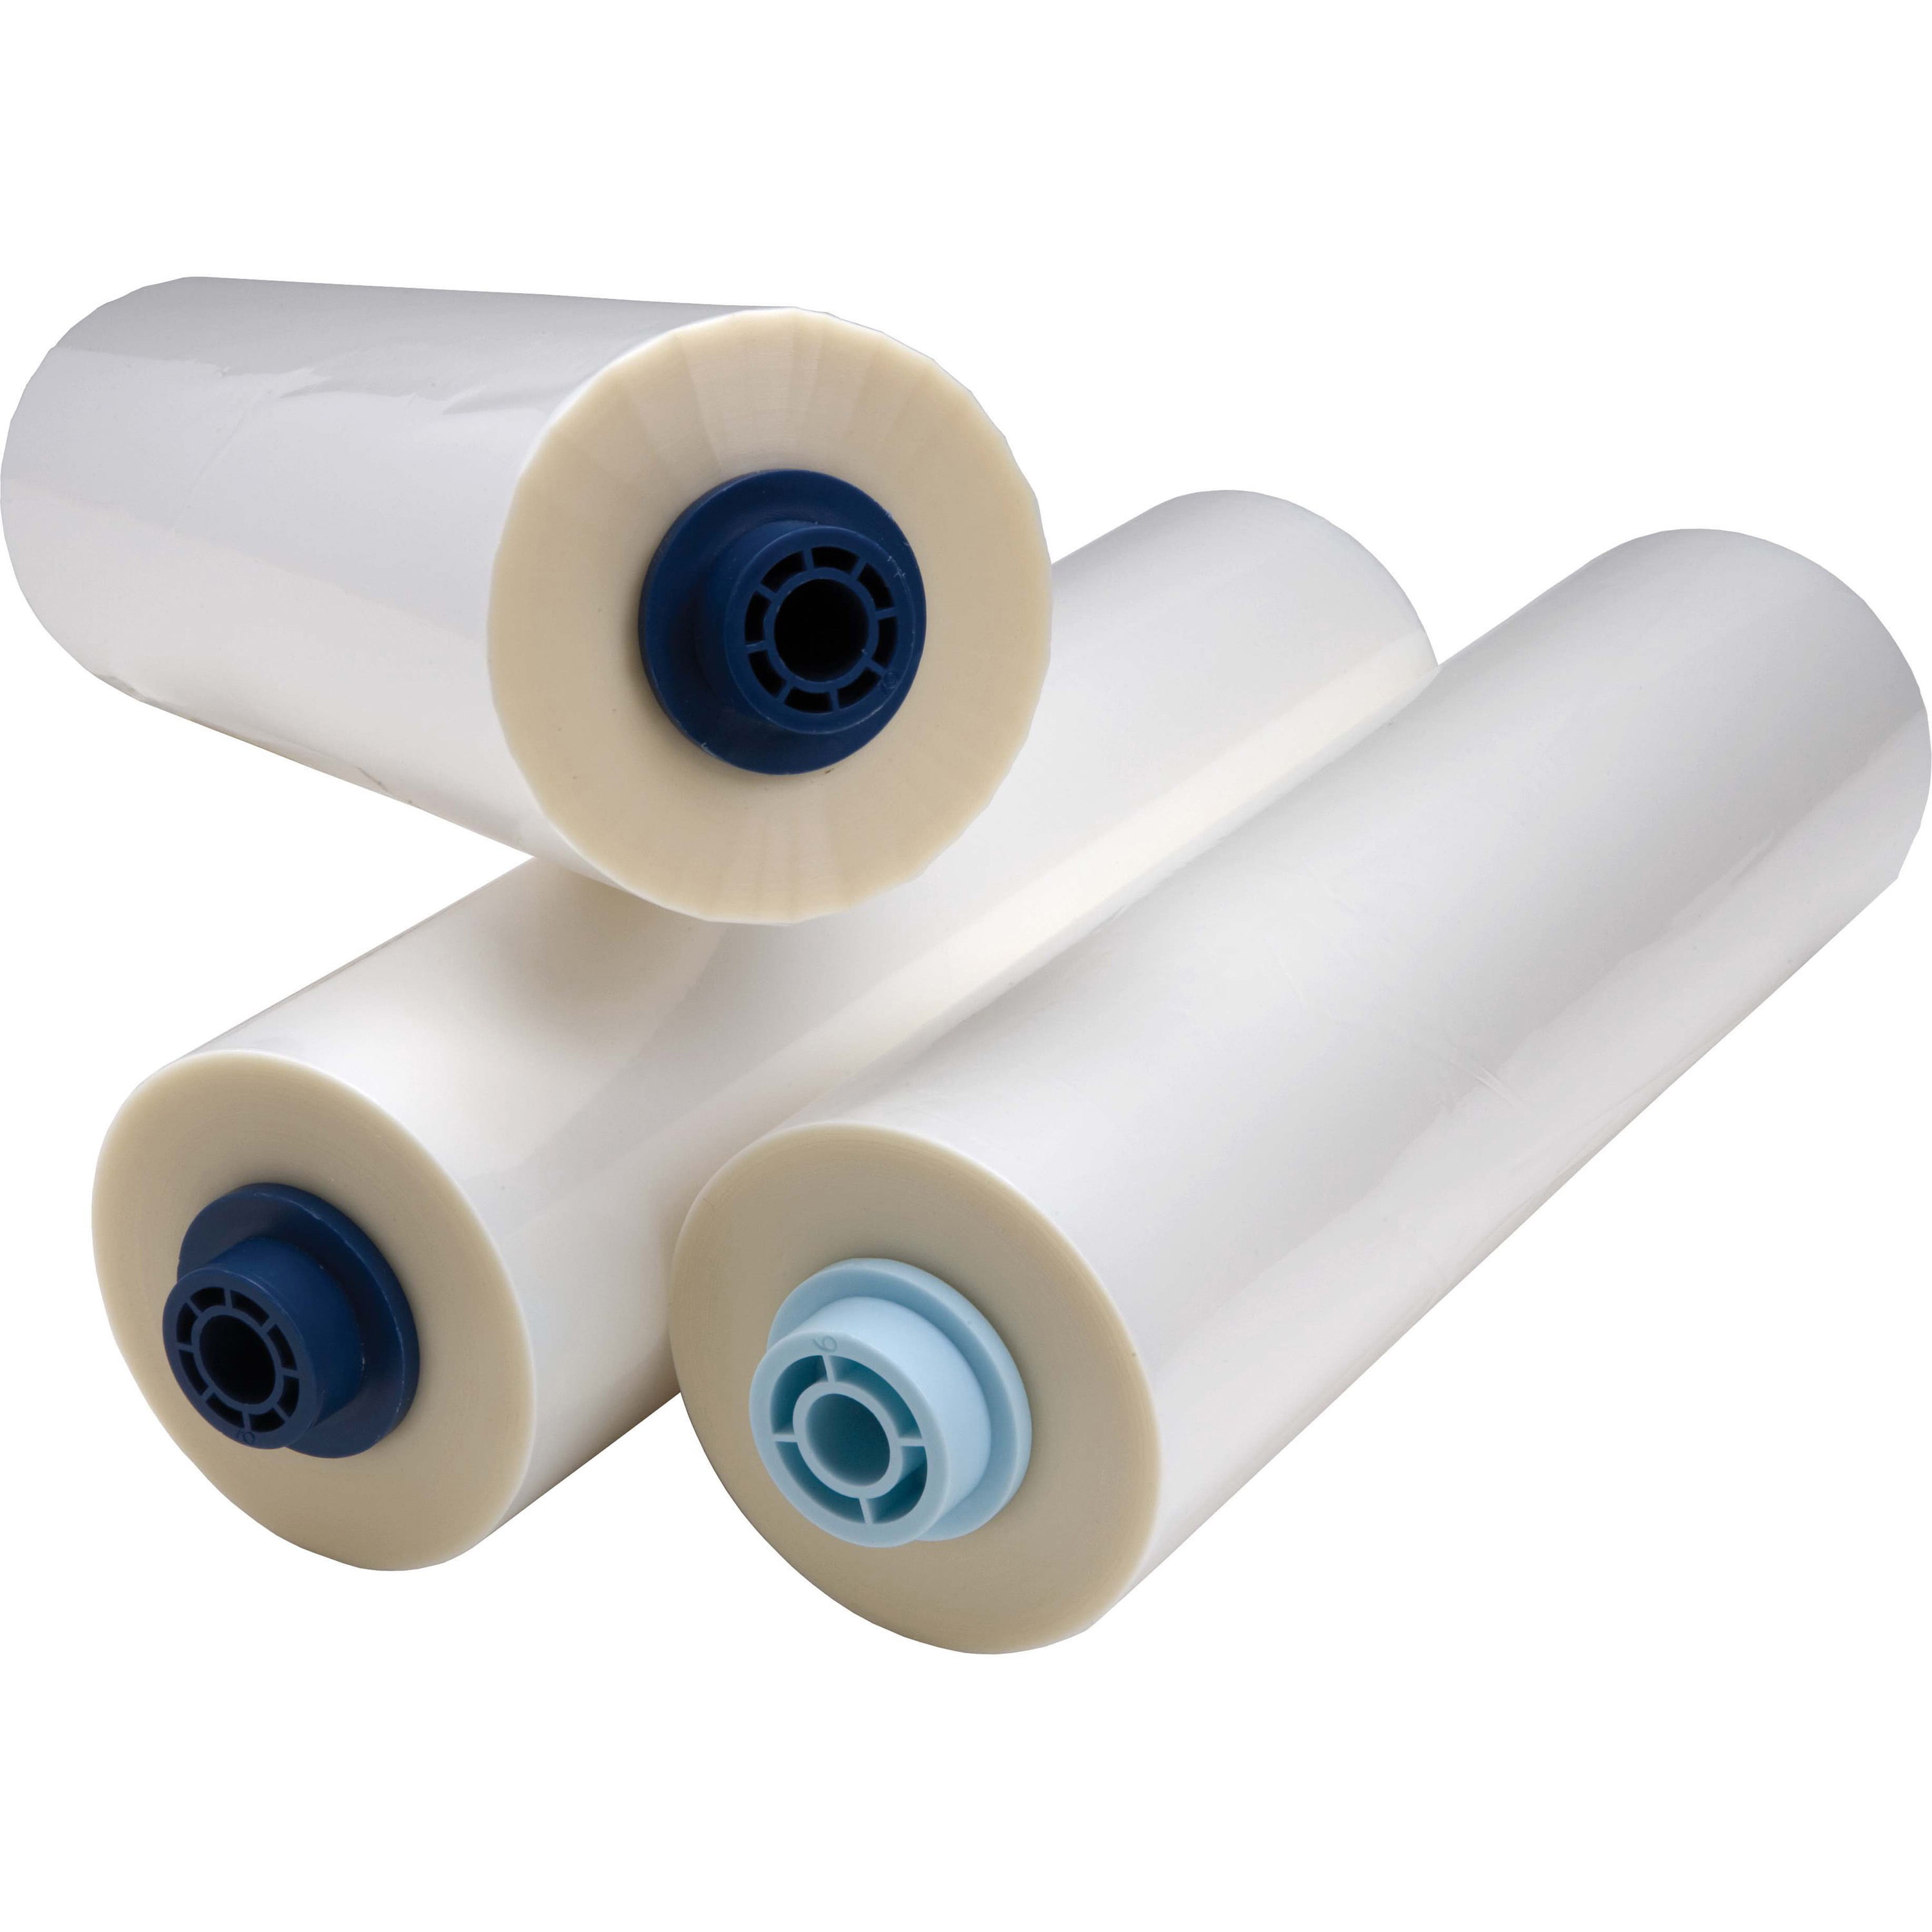 Duck Brand Stretch Wrap Roll 285850 Clear 3 Pack 20 inches by 1000 feet